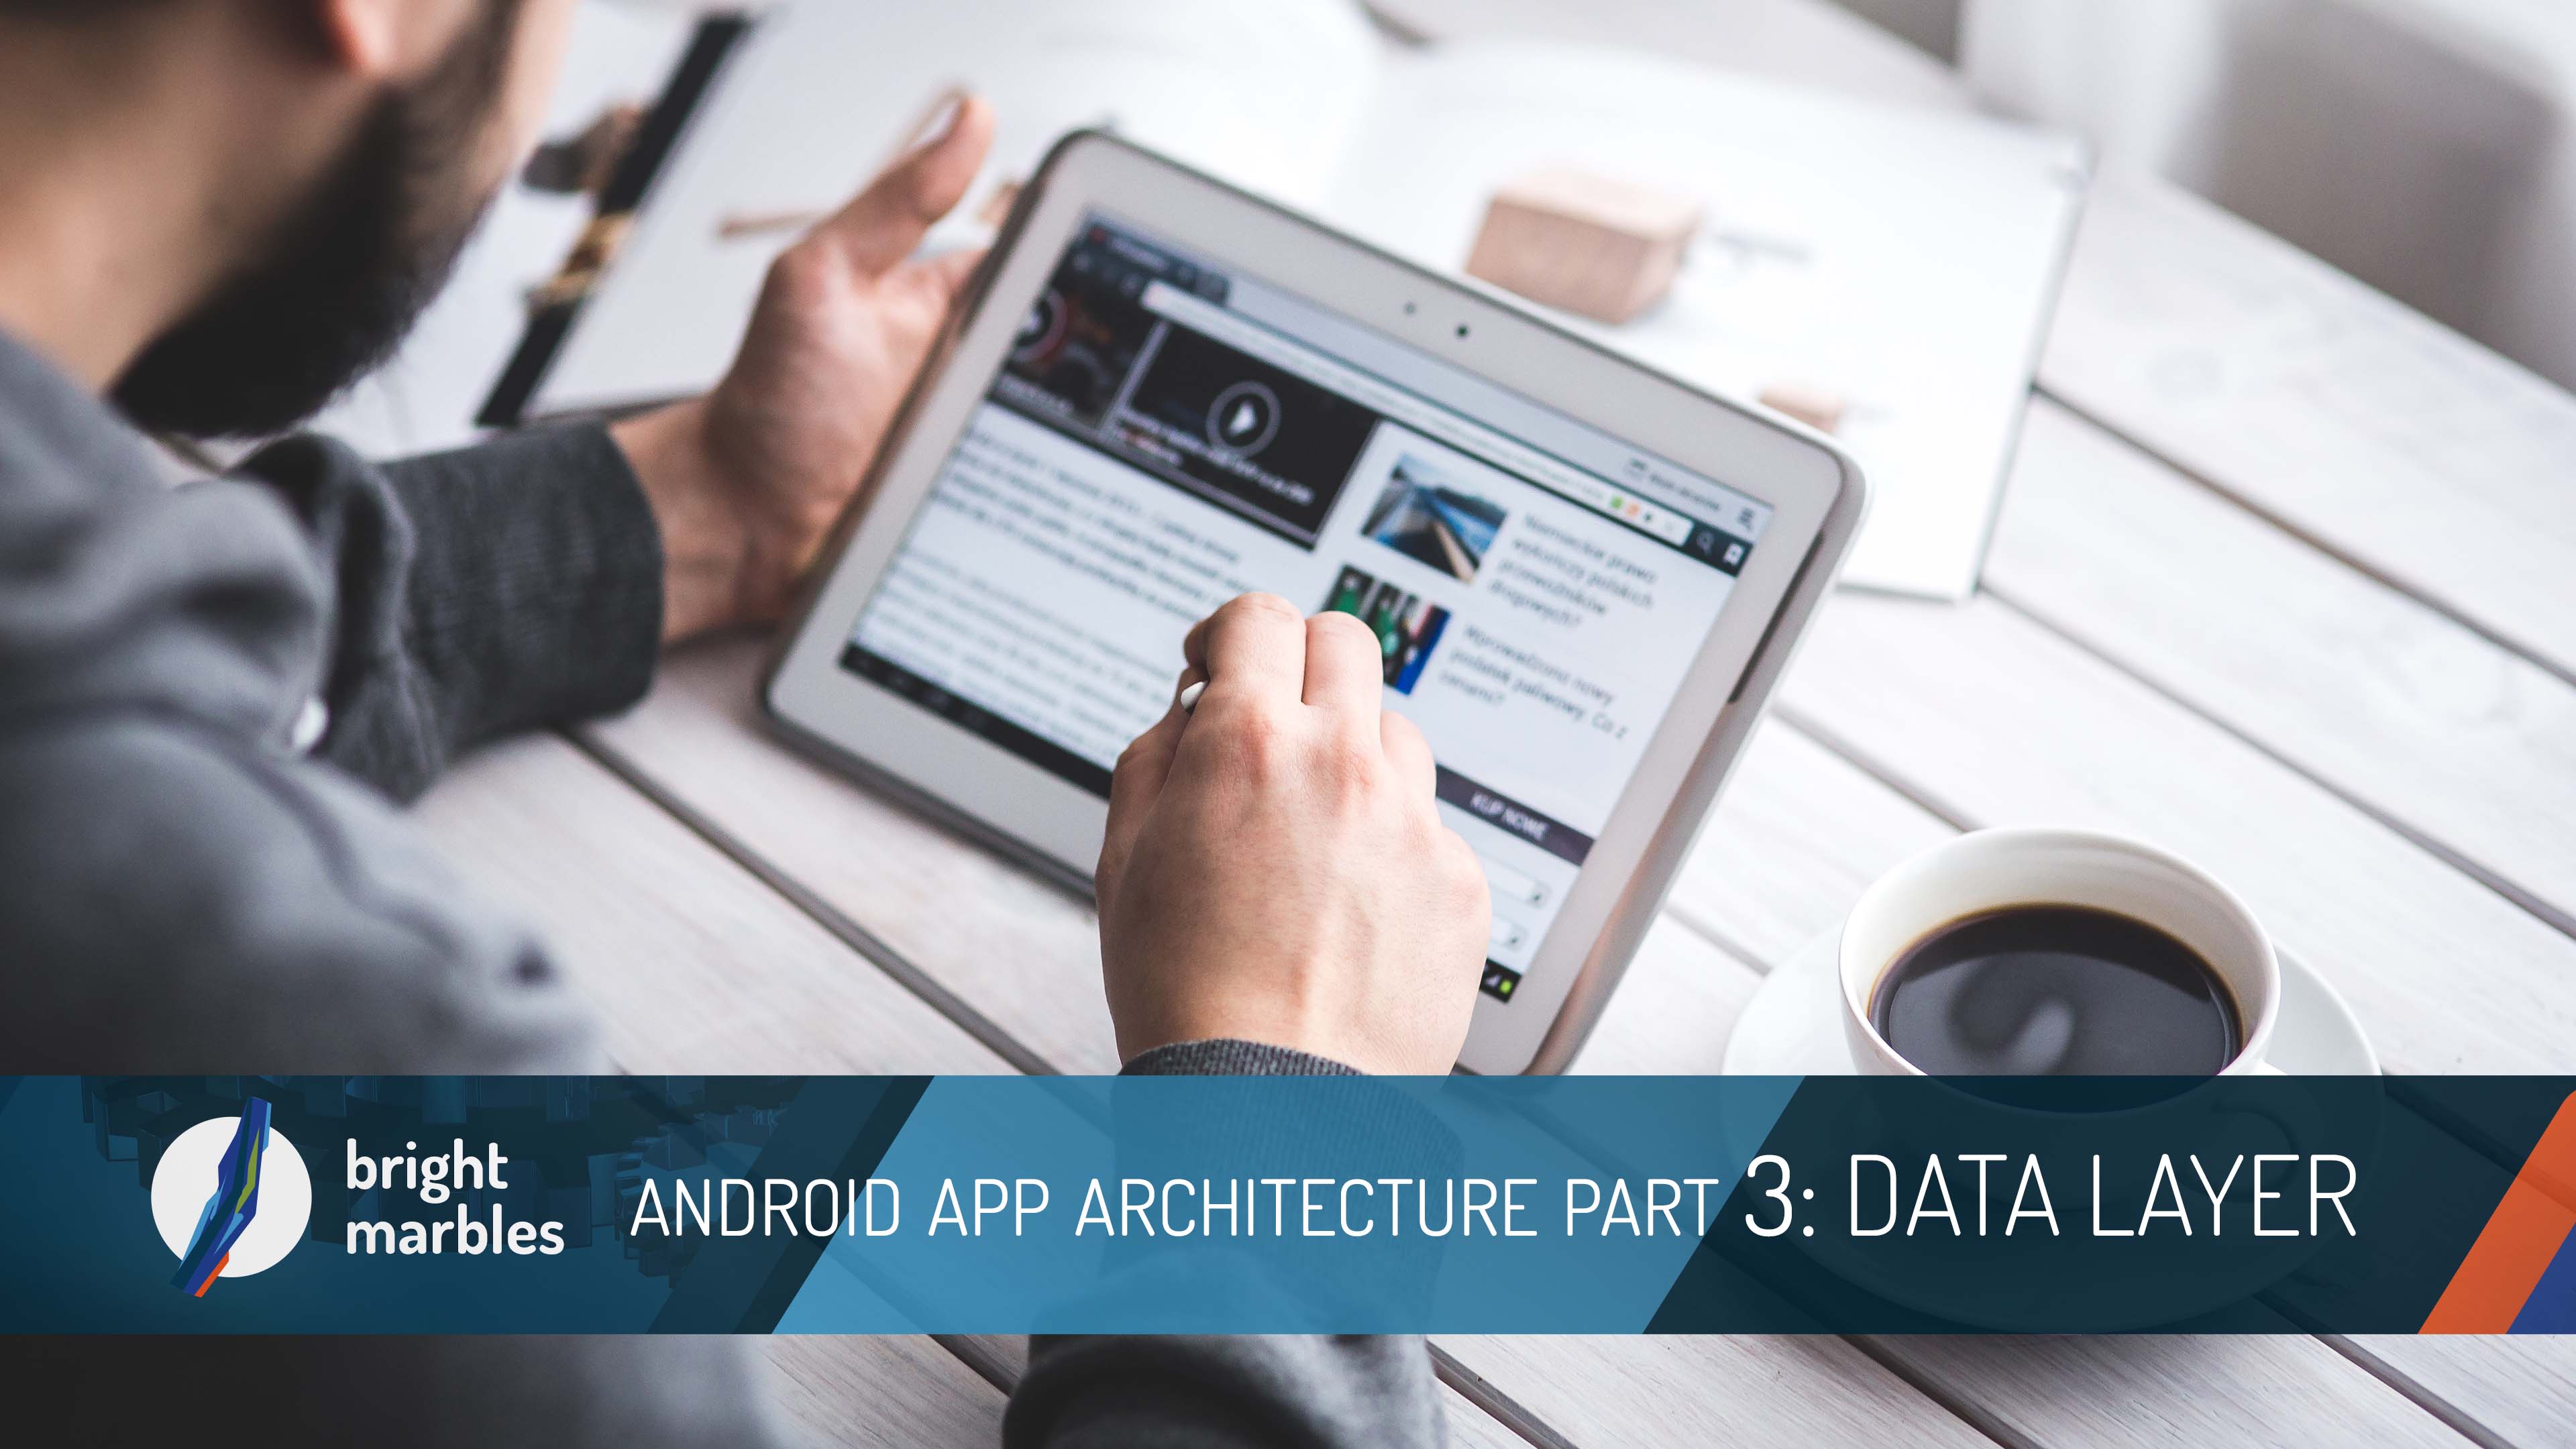 Android app architecture part 3